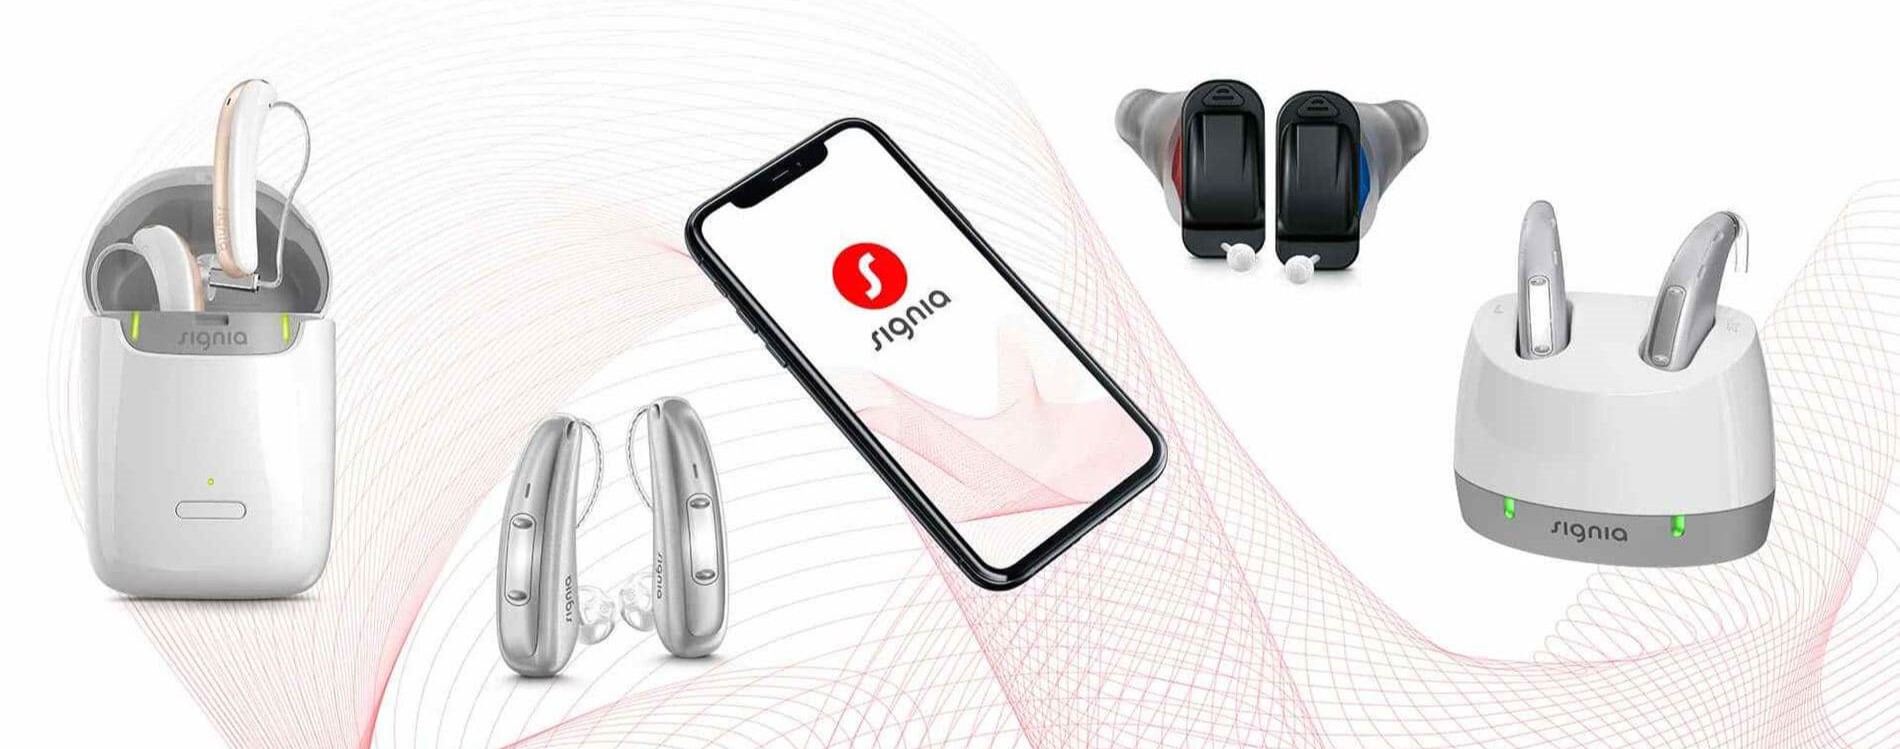 Resound Hearing Aid Lineup